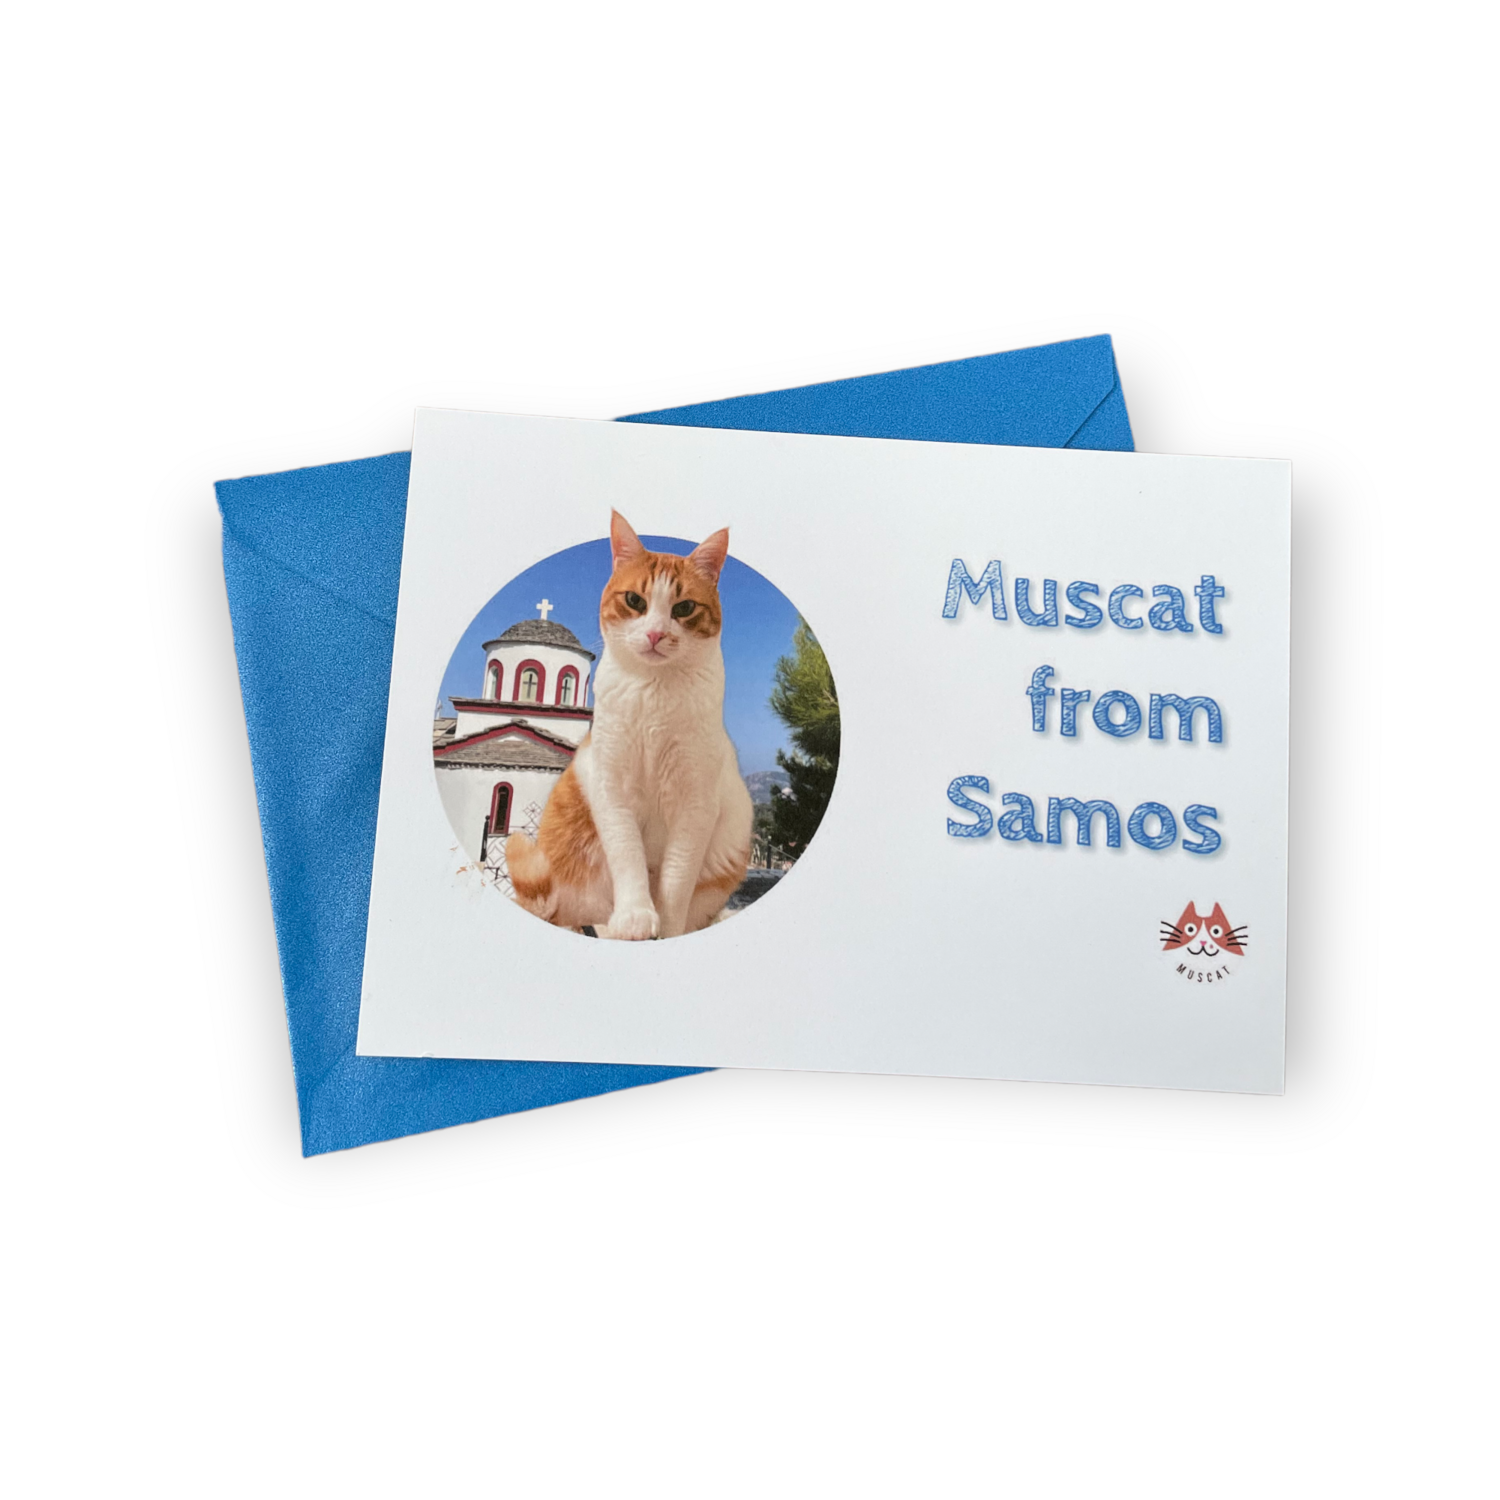 Wenskaart / Greeting Card The Muscat Collection